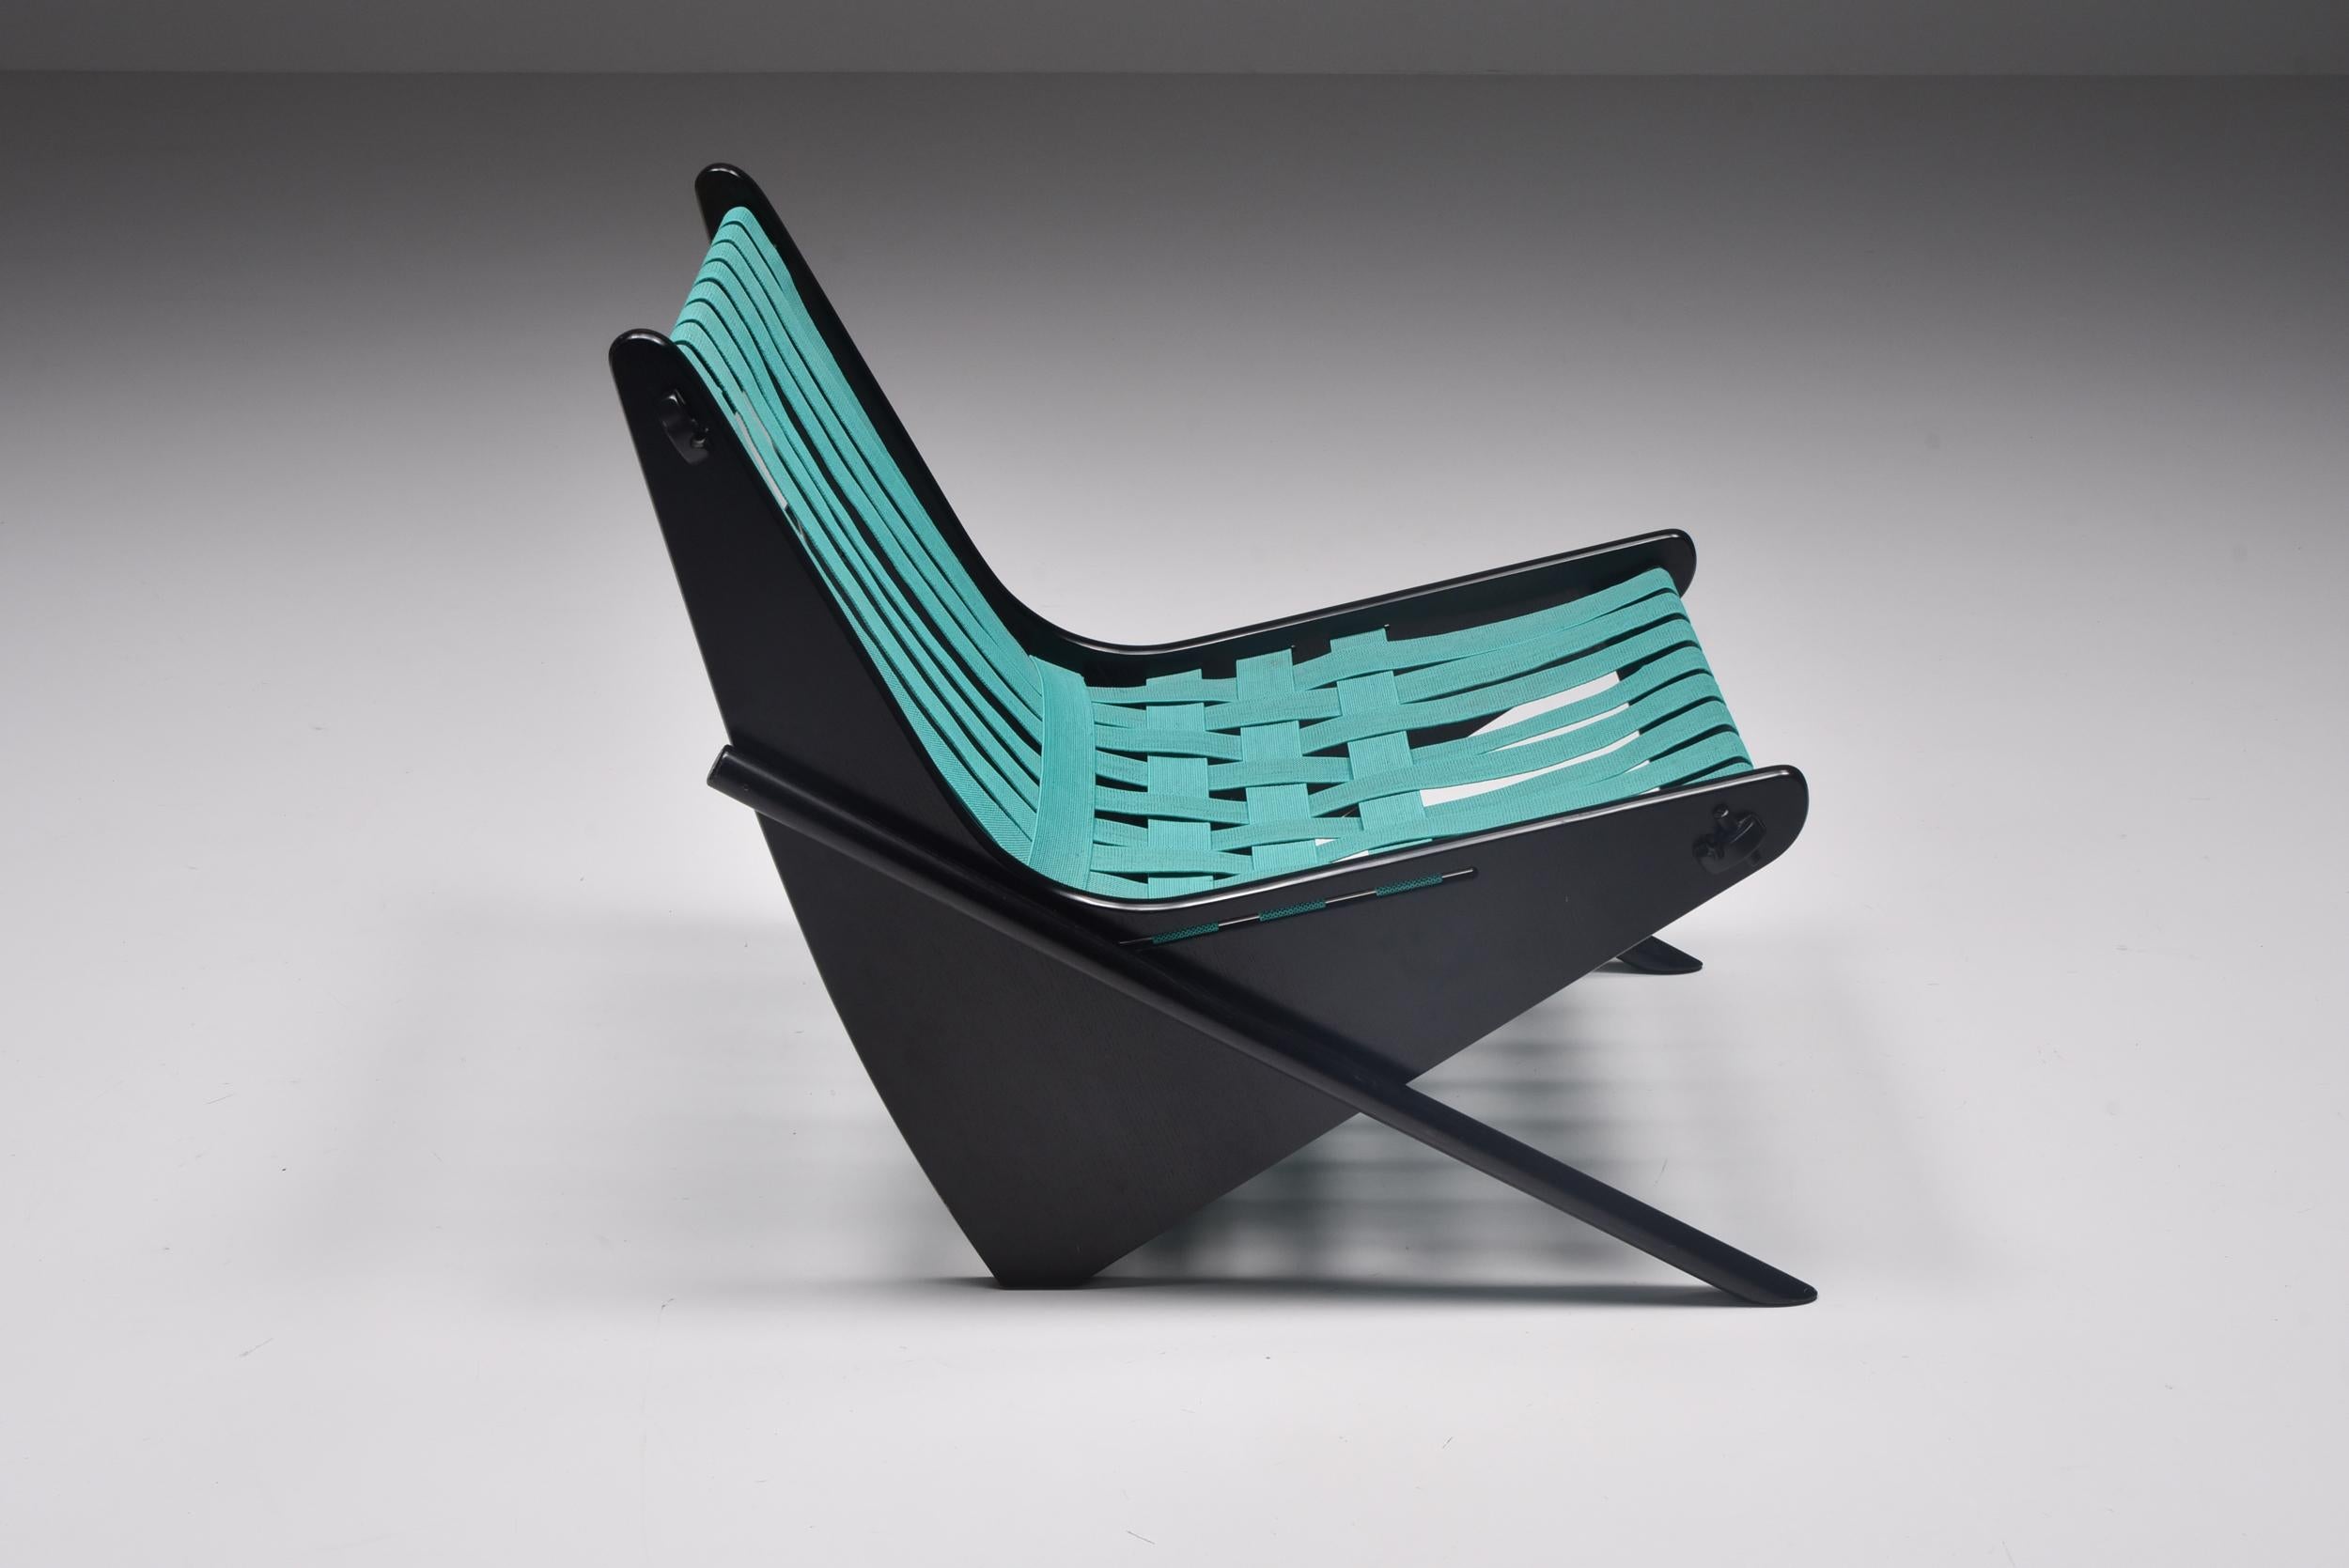 Richard Neutra; Furniture by architects; Modernist; Los Angeles Times; Miller house; Brazillian design; Bona SRL Italy; 1980's; Modern; Boomerang lounge chair; 

Richard Neutra's Boomerang lounge was designed in Brazil. This limited edition chair